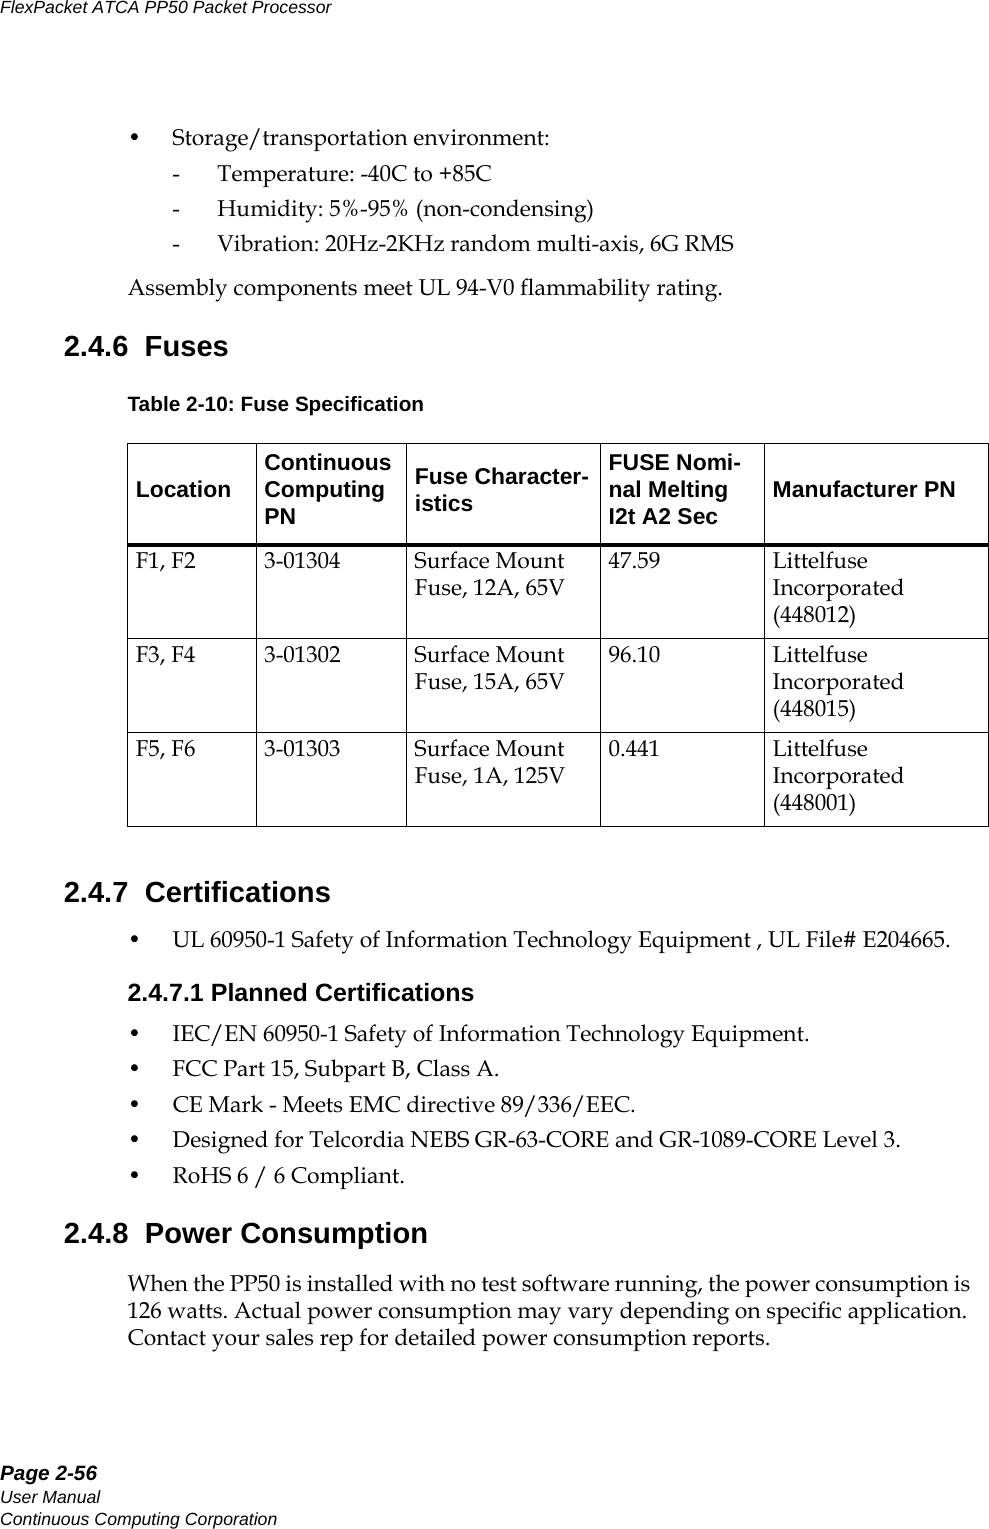 Page 2-56User ManualContinuous Computing CorporationFlexPacket ATCA PP50 Packet Processor     Preliminary• Storage/transportation environment: - Temperature: -40C to +85C- Humidity: 5%-95% (non-condensing)- Vibration: 20Hz-2KHz random multi-axis, 6G RMS Assembly components meet UL 94-V0 flammability rating.2.4.6  Fuses2.4.7  Certifications• UL 60950-1 Safety of Information Technology Equipment , UL File# E204665.2.4.7.1 Planned Certifications• IEC/EN 60950-1 Safety of Information Technology Equipment.• FCC Part 15, Subpart B, Class A. •CE Mark - Meets EMC directive 89/336/EEC.• Designed for Telcordia NEBS GR-63-CORE and GR-1089-CORE Level 3.• RoHS 6 / 6 Compliant.2.4.8  Power ConsumptionWhen the PP50 is installed with no test software running, the power consumption is 126 watts. Actual power consumption may vary depending on specific application. Contact your sales rep for detailed power consumption reports. Table 2-10: Fuse SpecificationLocation Continuous Computing PNFuse Character-isticsFUSE Nomi-nal Melting I2t A2 Sec Manufacturer PNF1, F2 3-01304 Surface Mount Fuse, 12A, 65V47.59 Littelfuse Incorporated (448012)F3, F4 3-01302 Surface Mount Fuse, 15A, 65V96.10 Littelfuse Incorporated (448015)F5, F6 3-01303 Surface Mount Fuse, 1A, 125V0.441 Littelfuse Incorporated (448001)